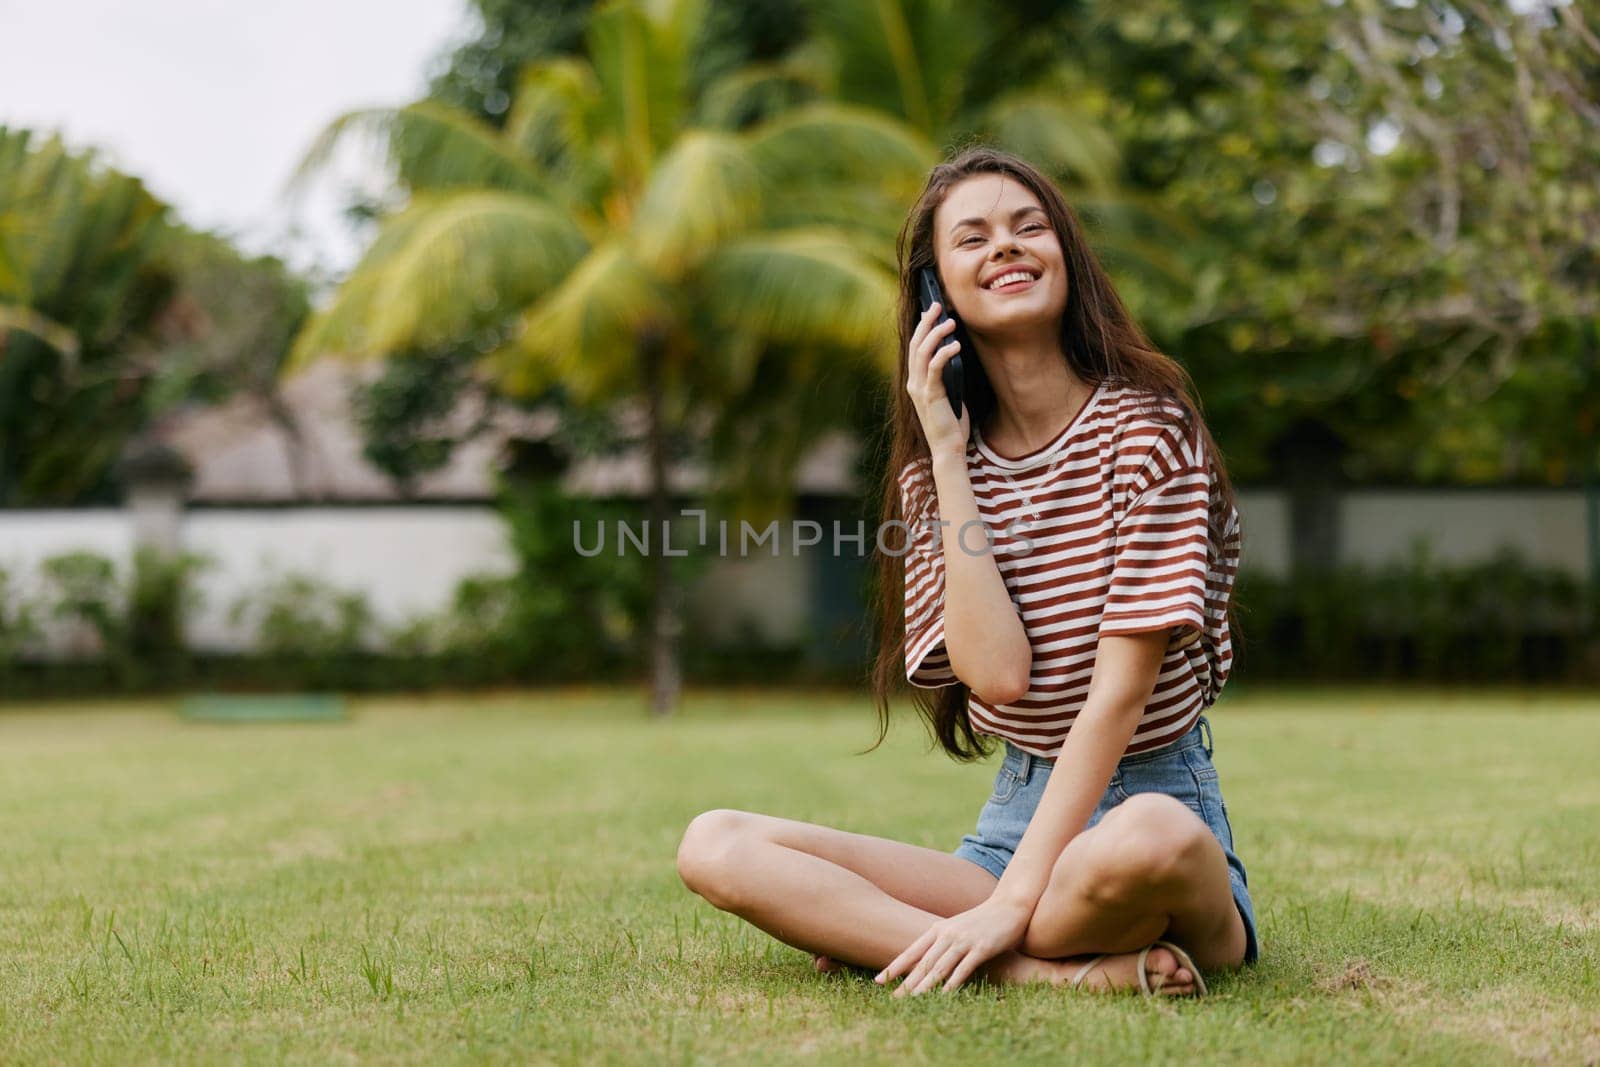 woman cellphone park application cell using phone tree grass smiling mobile browsing summer palm adult nature happy striped girl smartphone lifestyle blogger